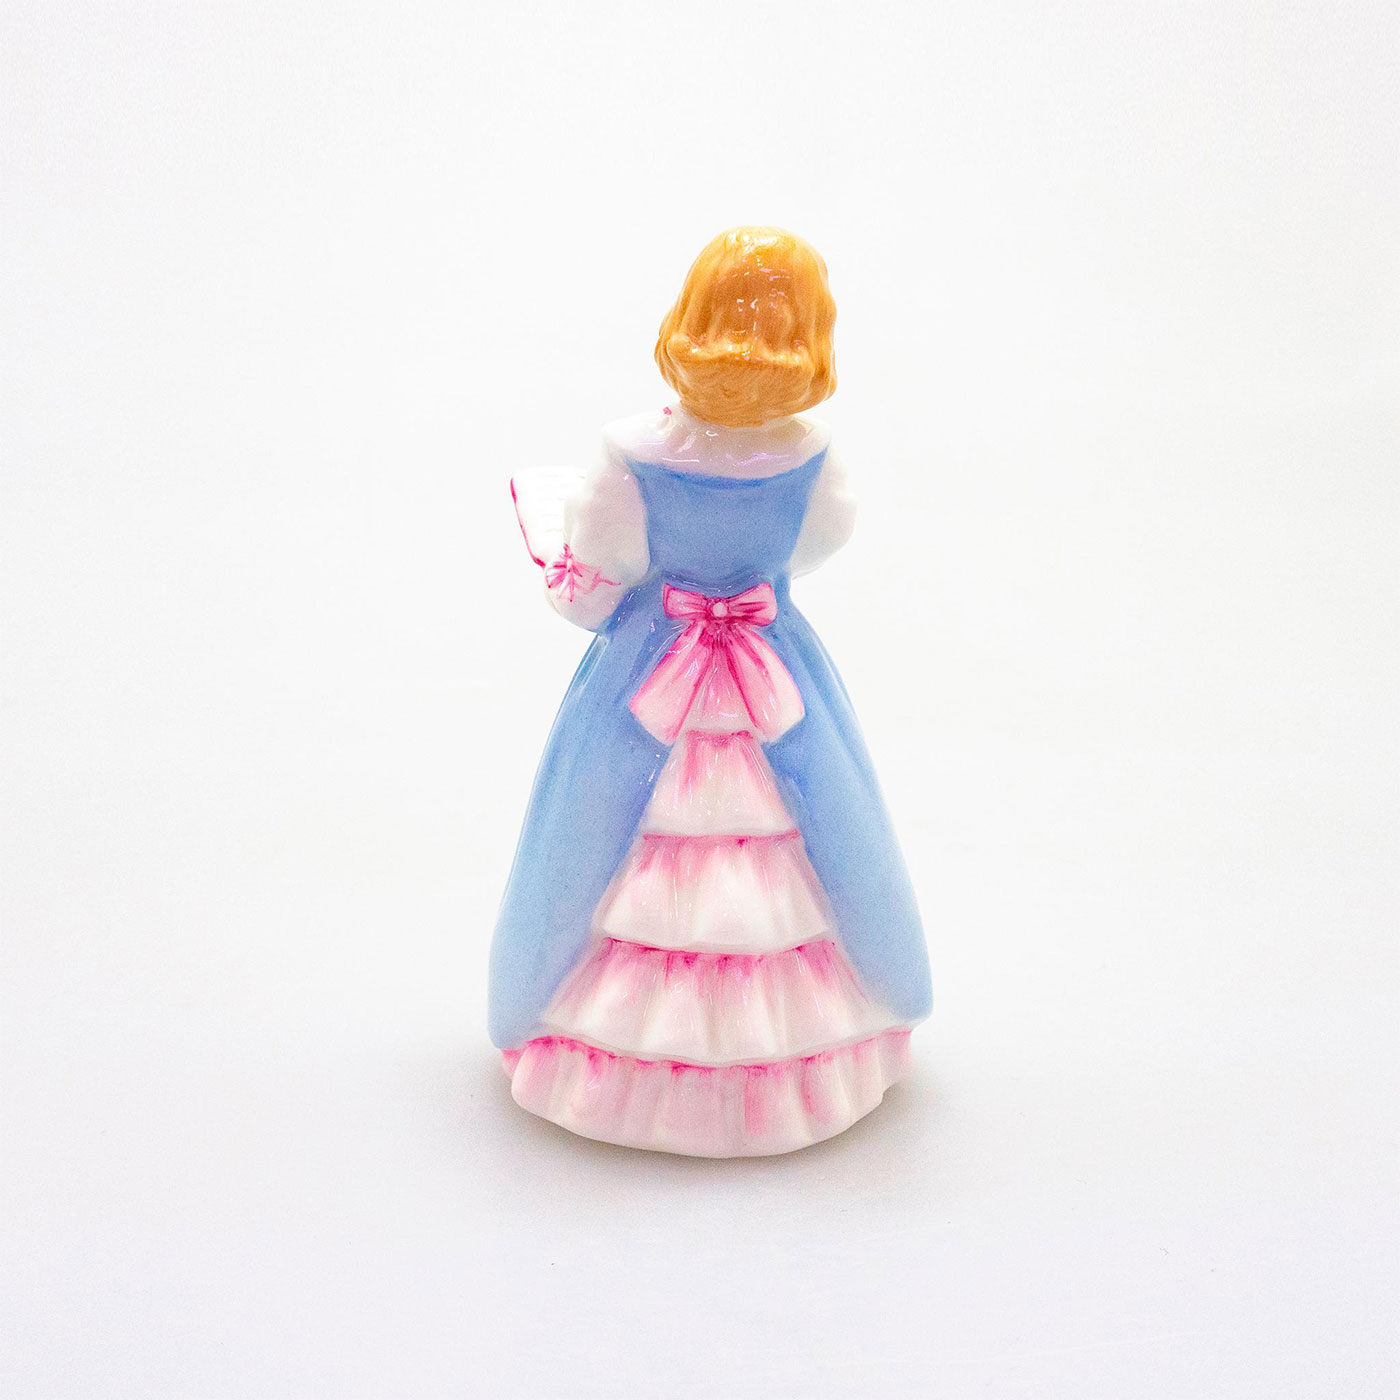 First Recital HN3652 - Royal Doulton Figurine - Image 2 of 3